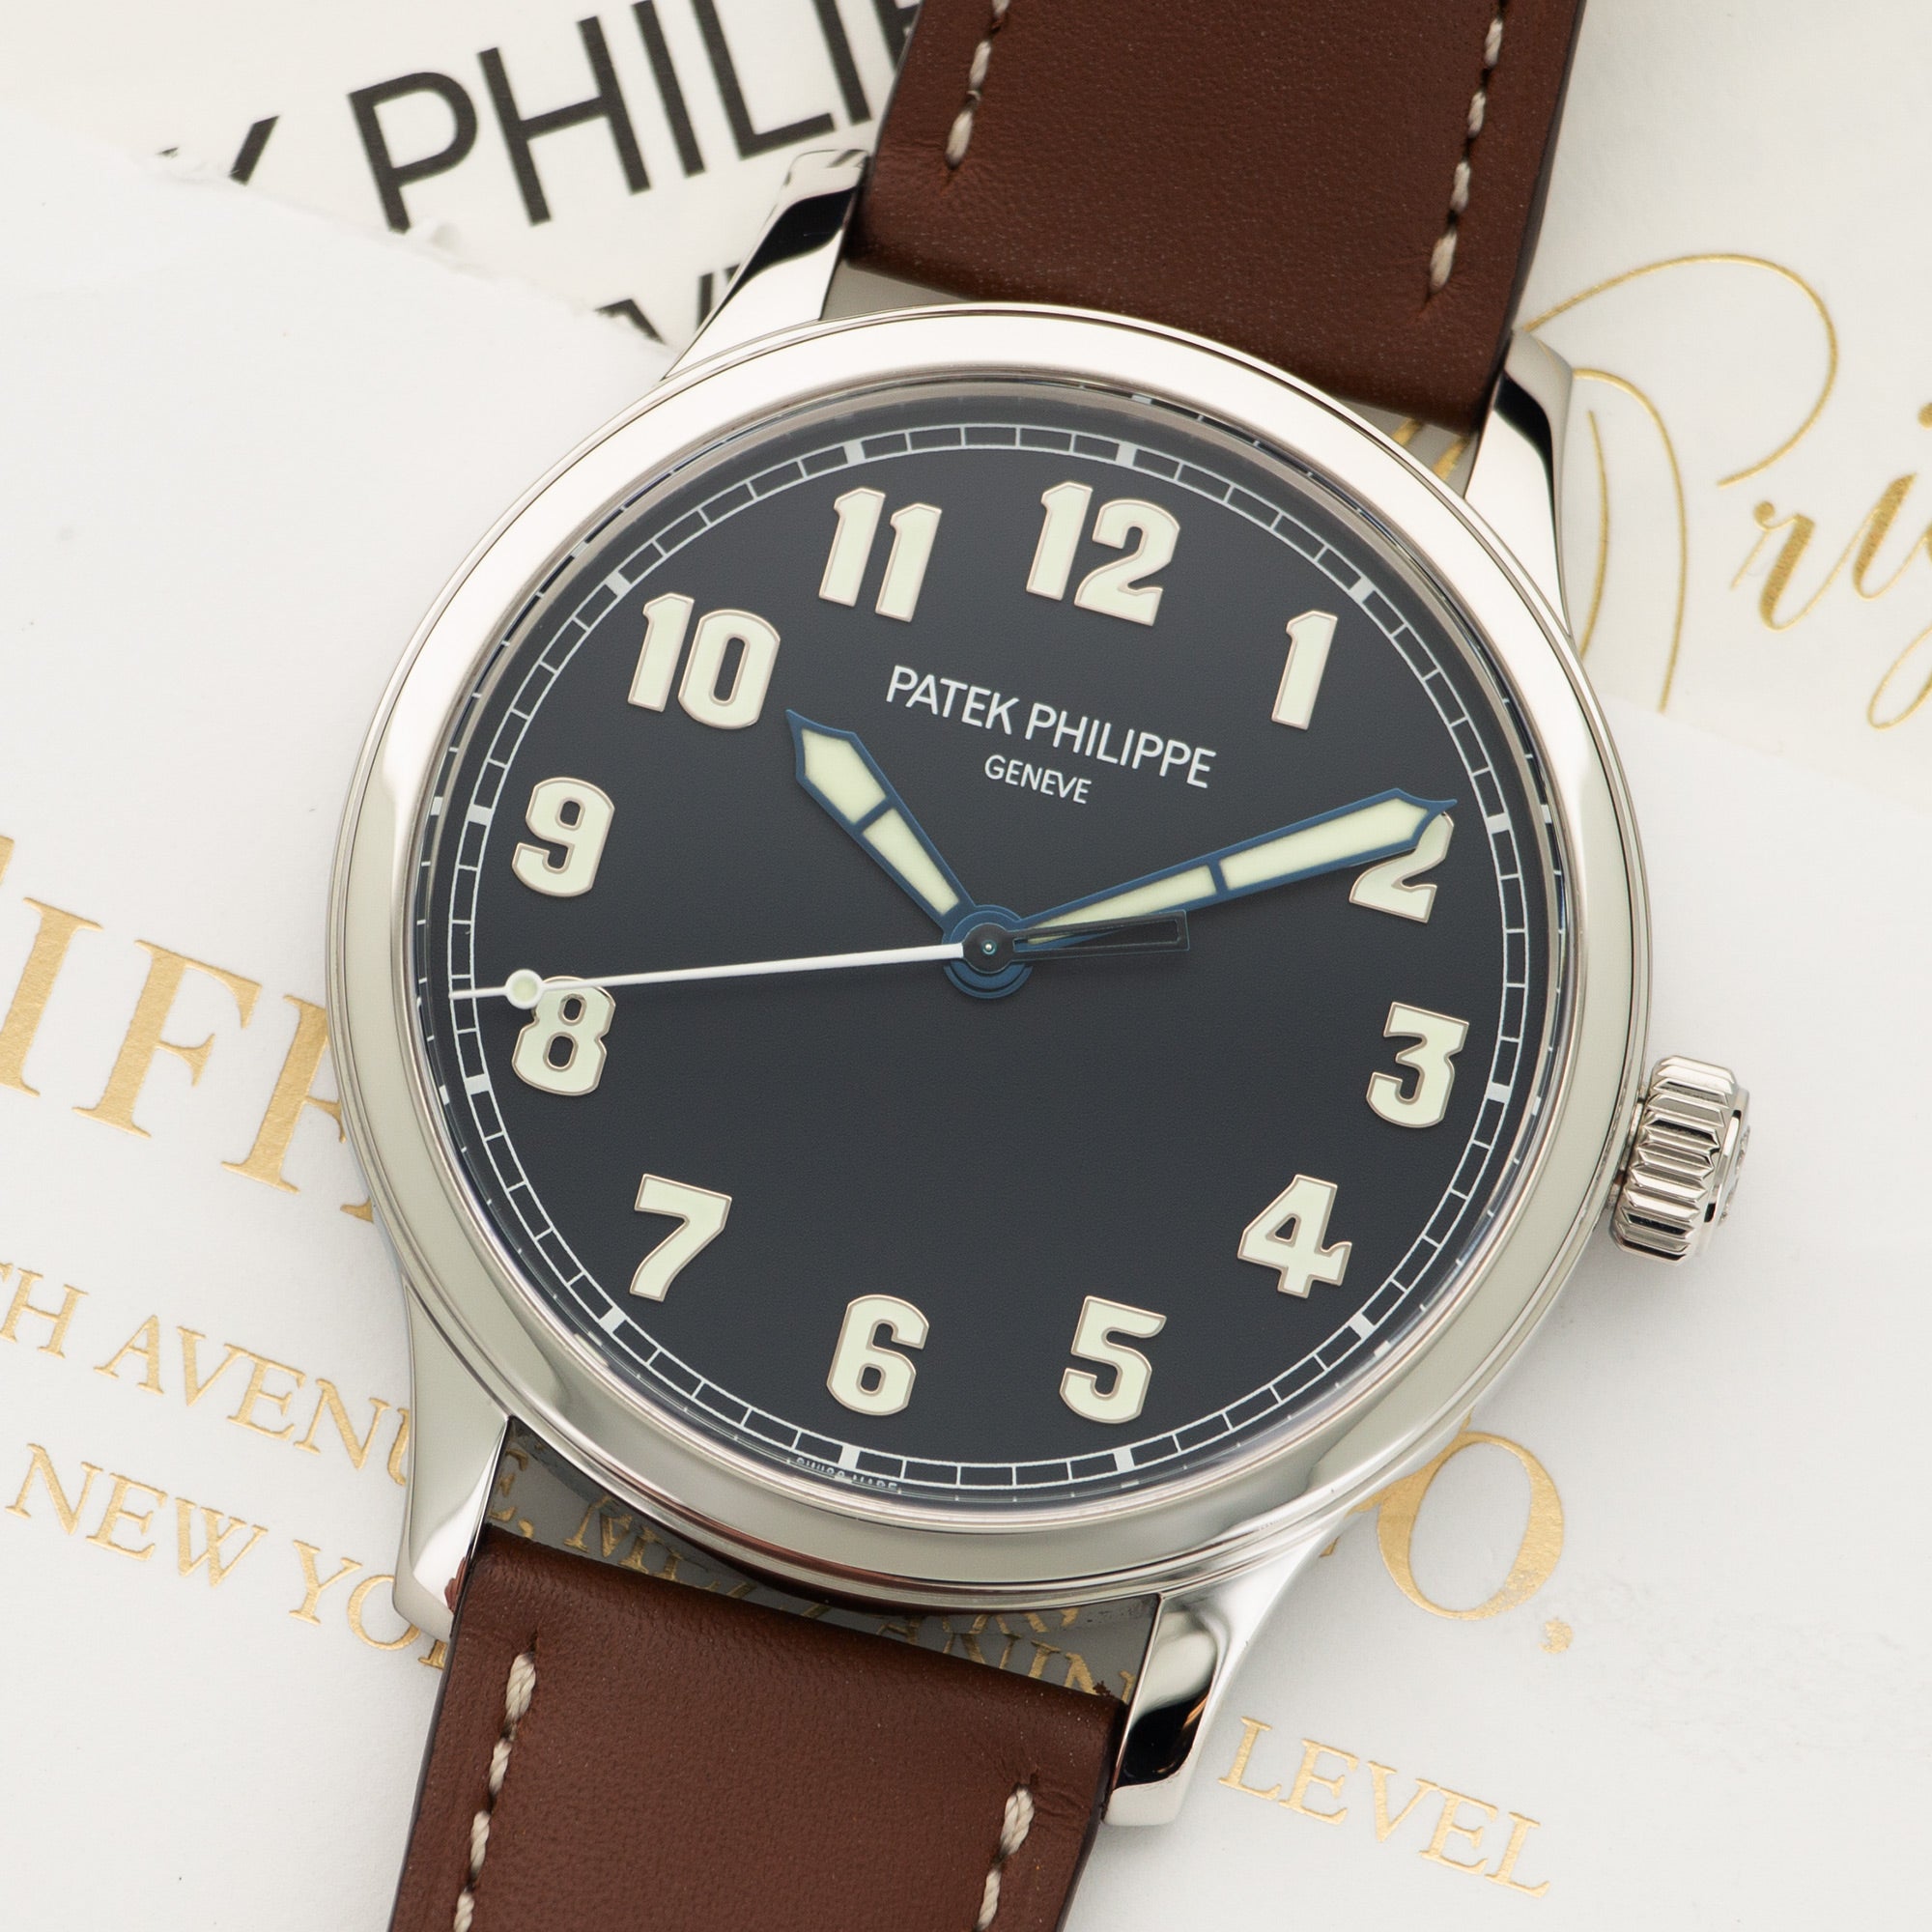 Patek Philippe - Patek Philippe Stainless Steel Pilot Watch Ref. 5522 Retailed by Tiffany & Co. - The Keystone Watches